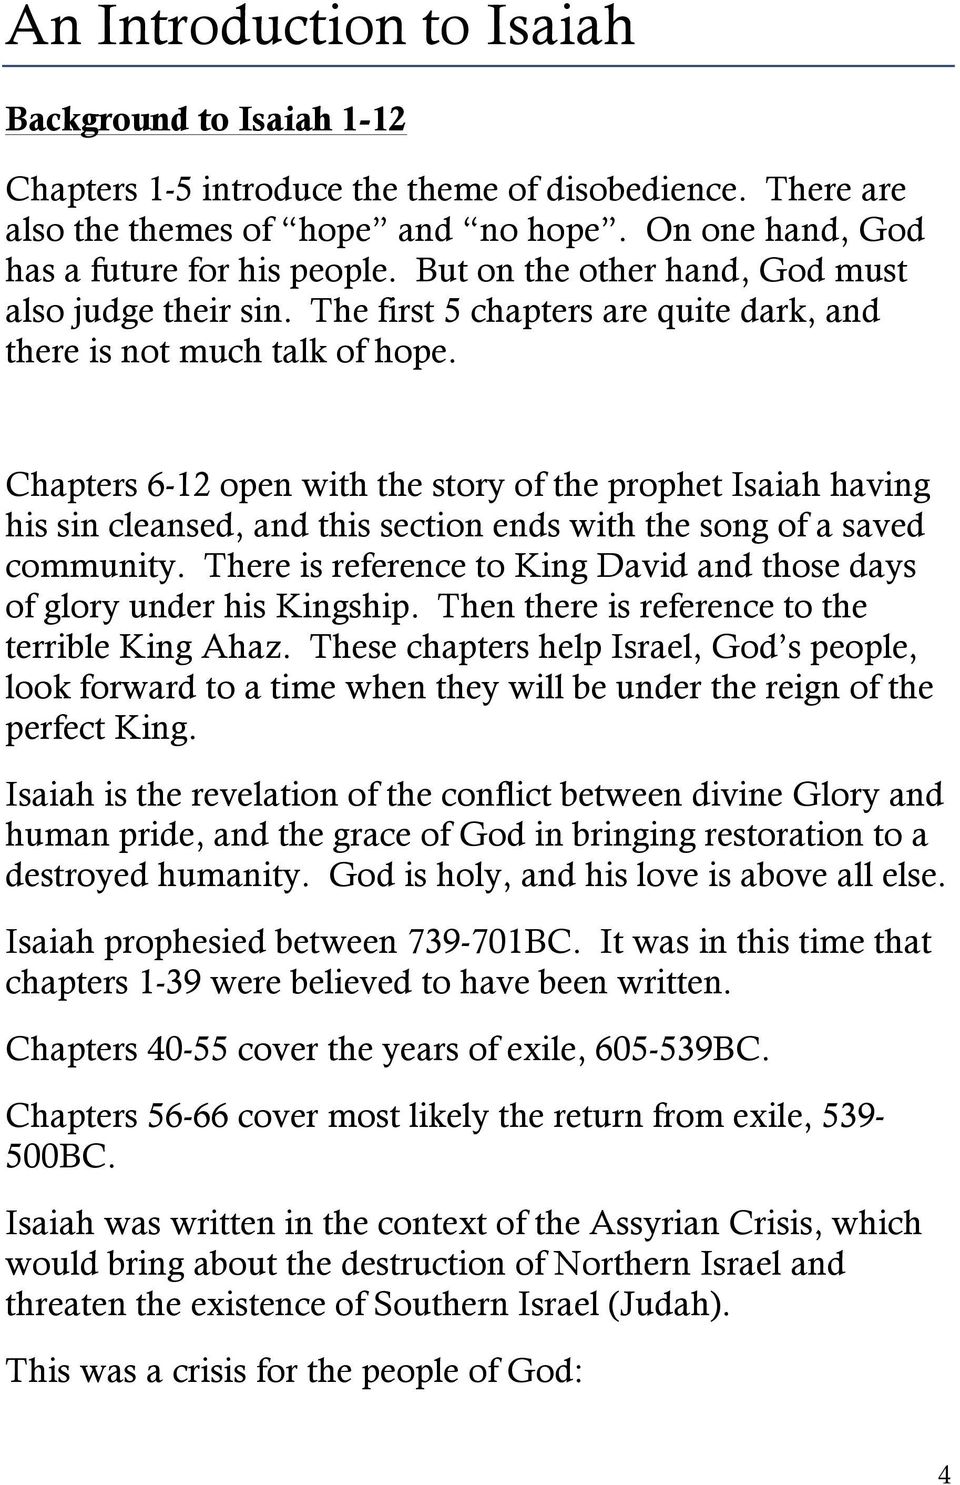 Chapters 6-12 open with the story of the prophet Isaiah having his sin cleansed, and this section ends with the song of a saved community.